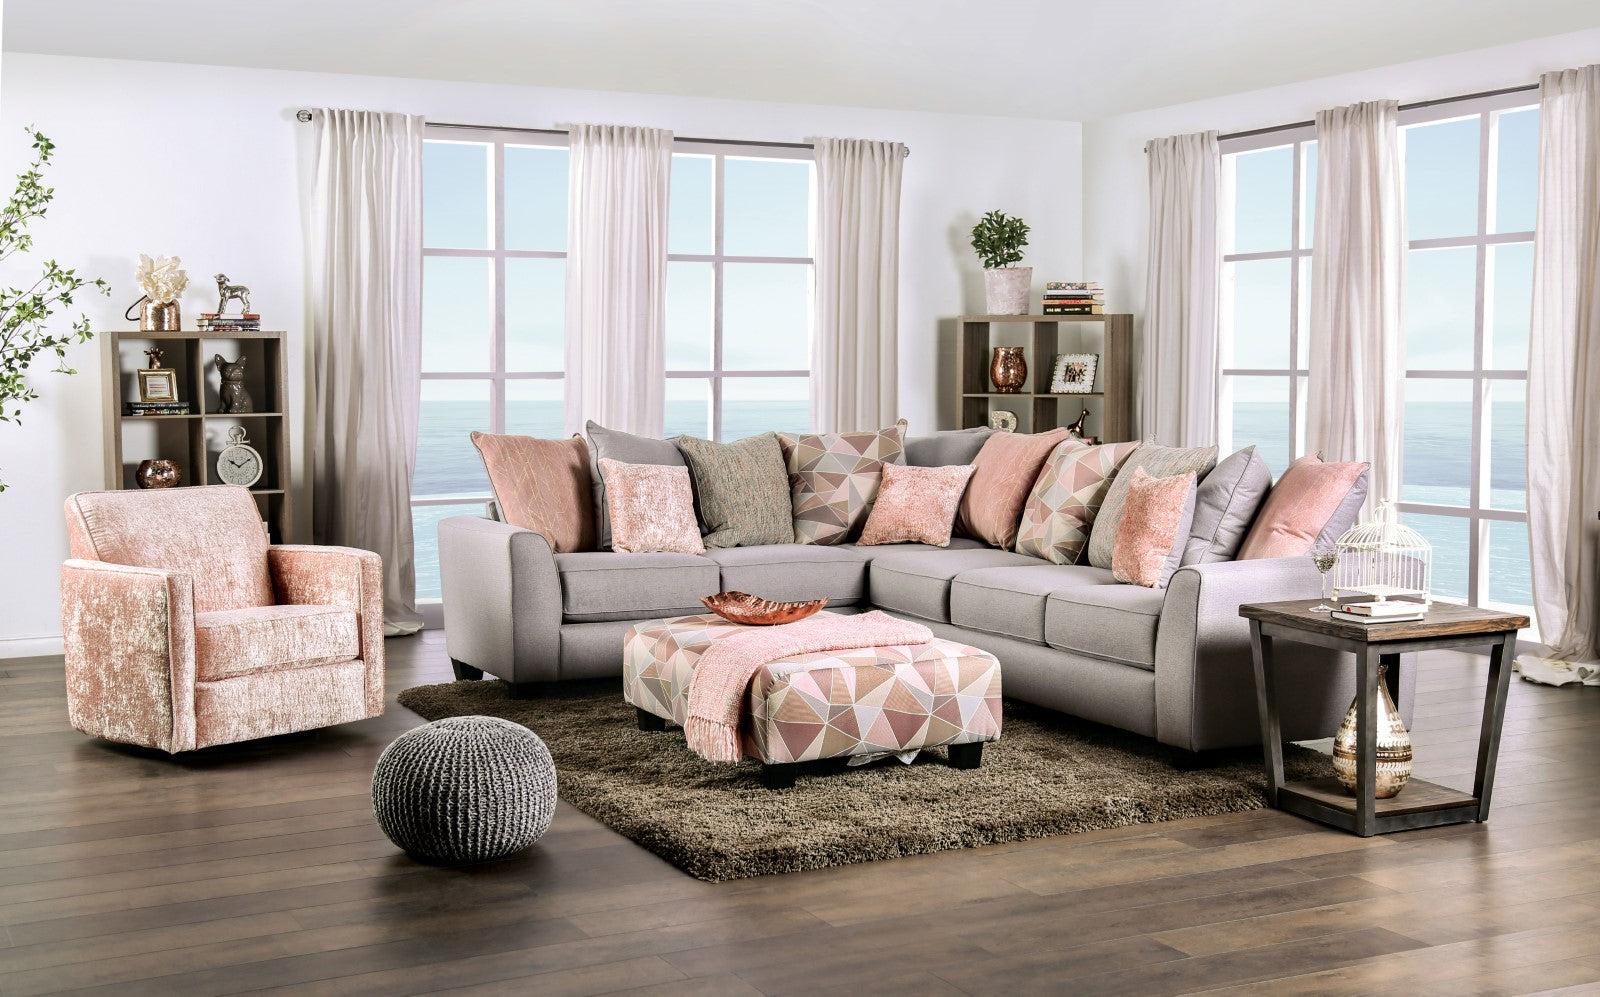 Transitional Sectional Sofa Chair and Ottoman SM5167-3PC Harriden SM5167-3PC in Gray Chenille